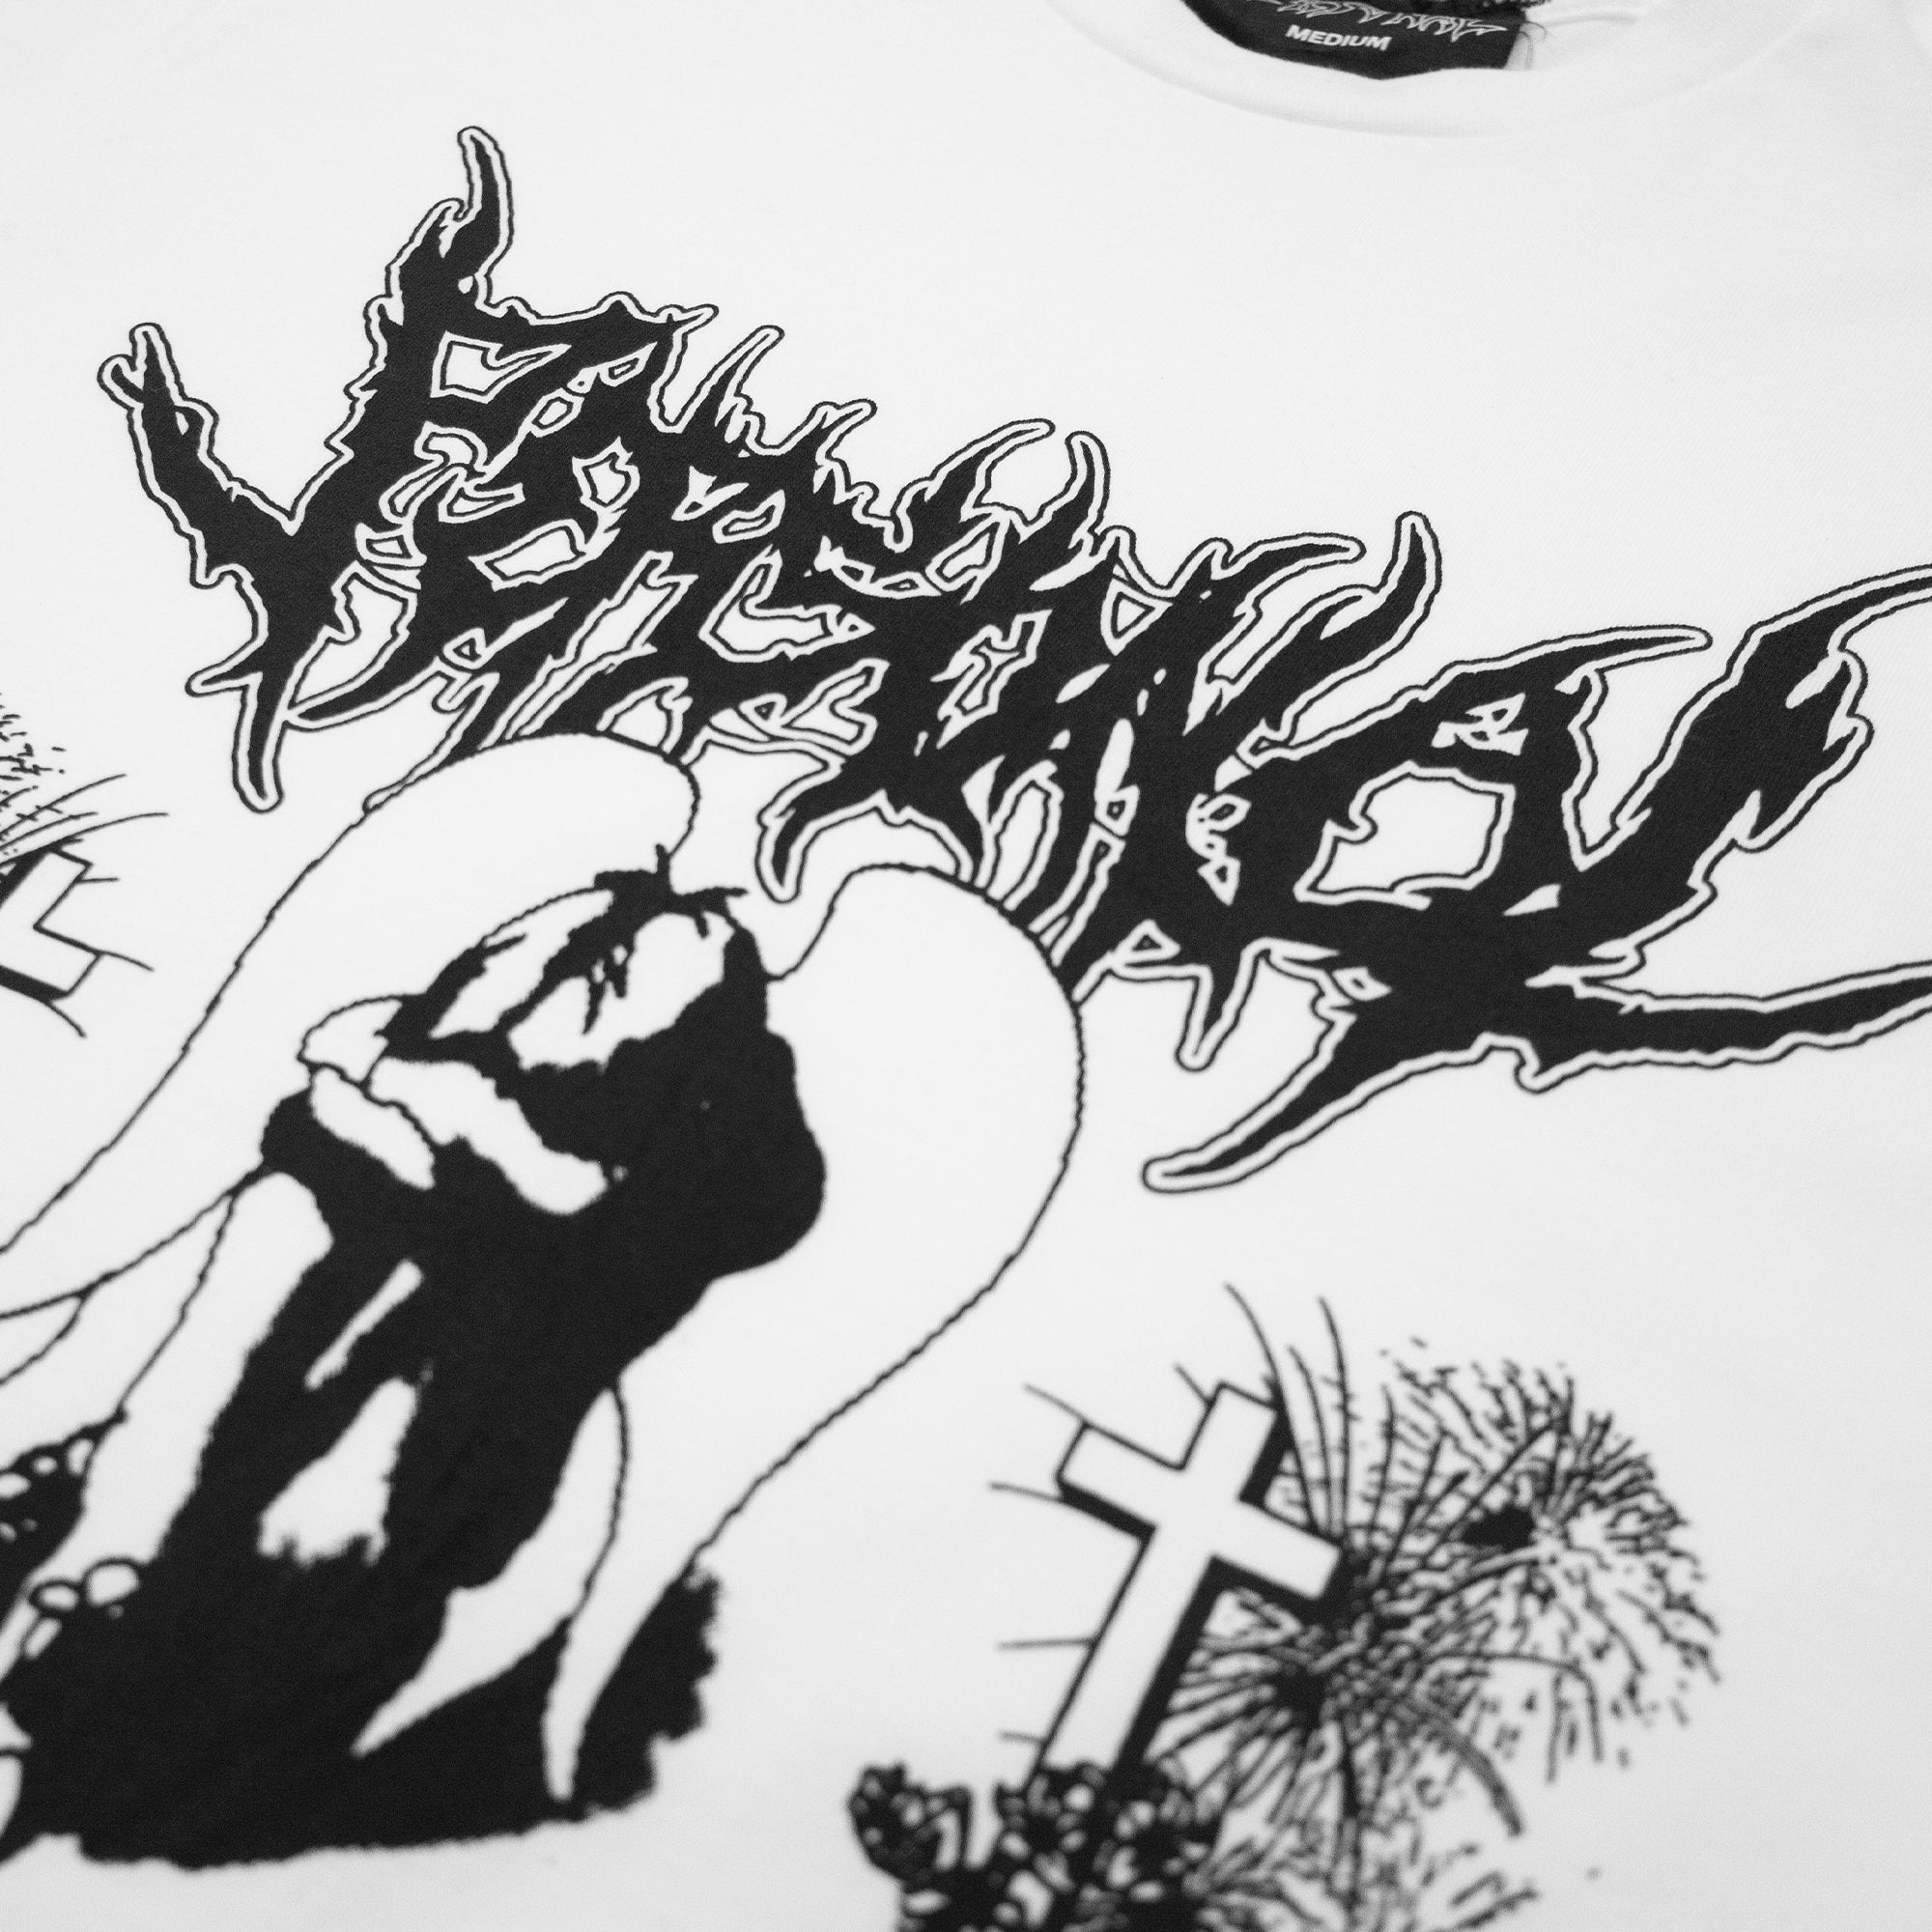 PERSONAL "FUNERAL FIREWORKS" TEE WHITE